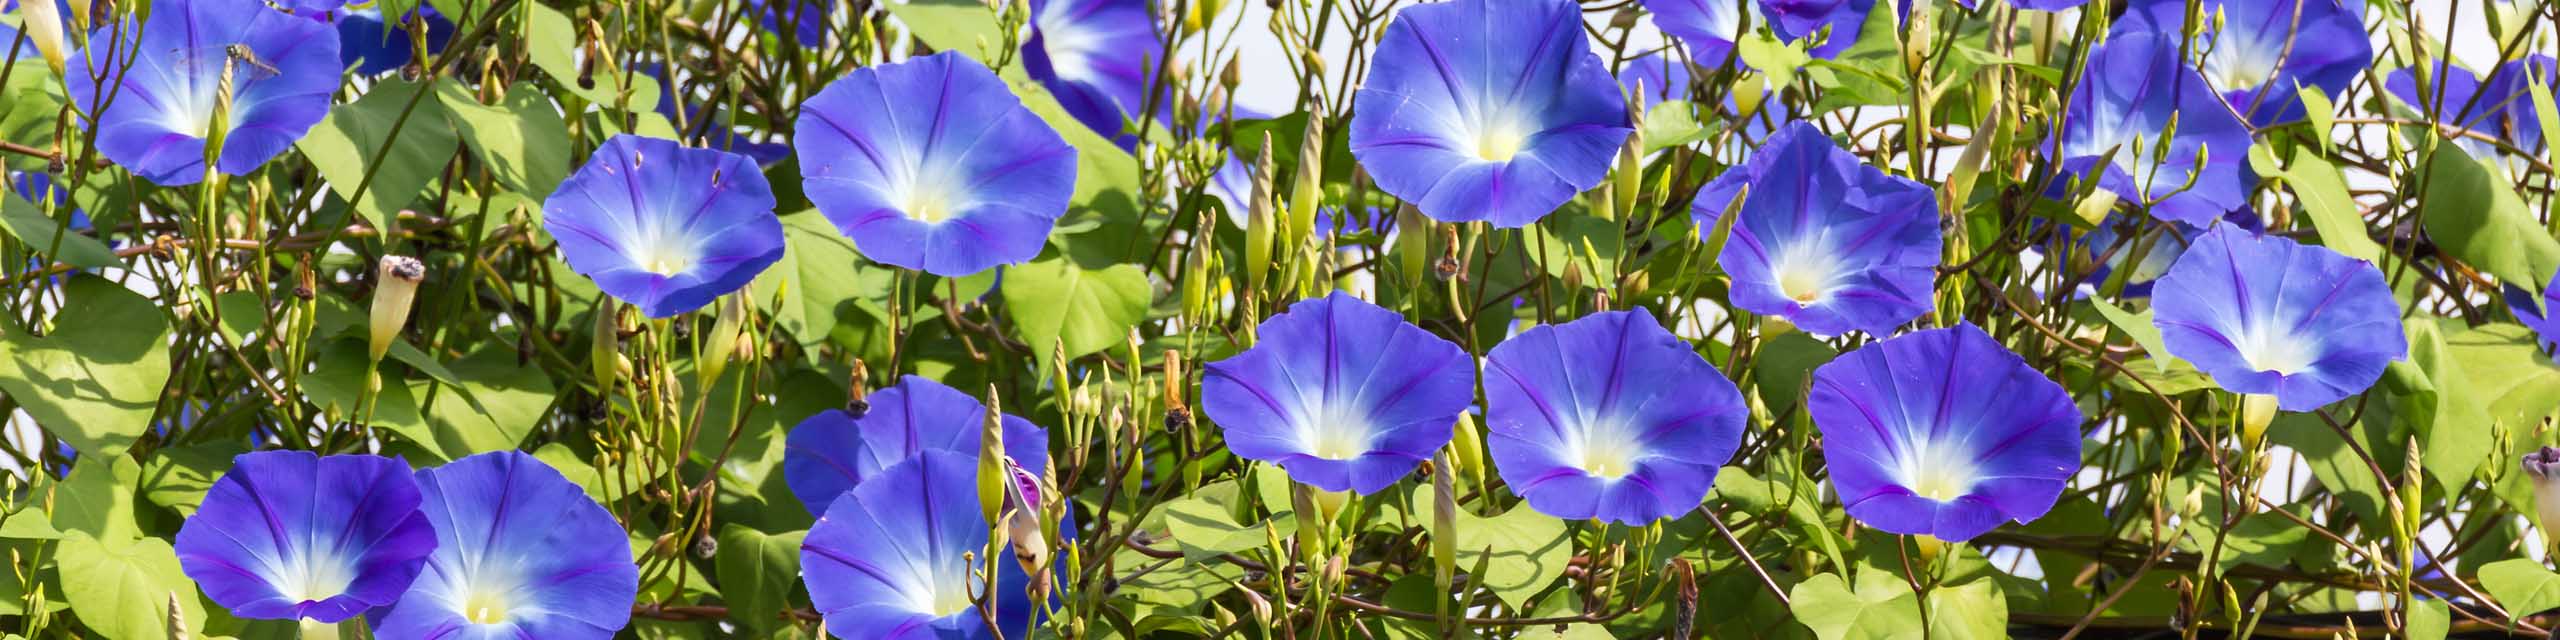 Purple-blue morning glory flowers blooming on a vine.